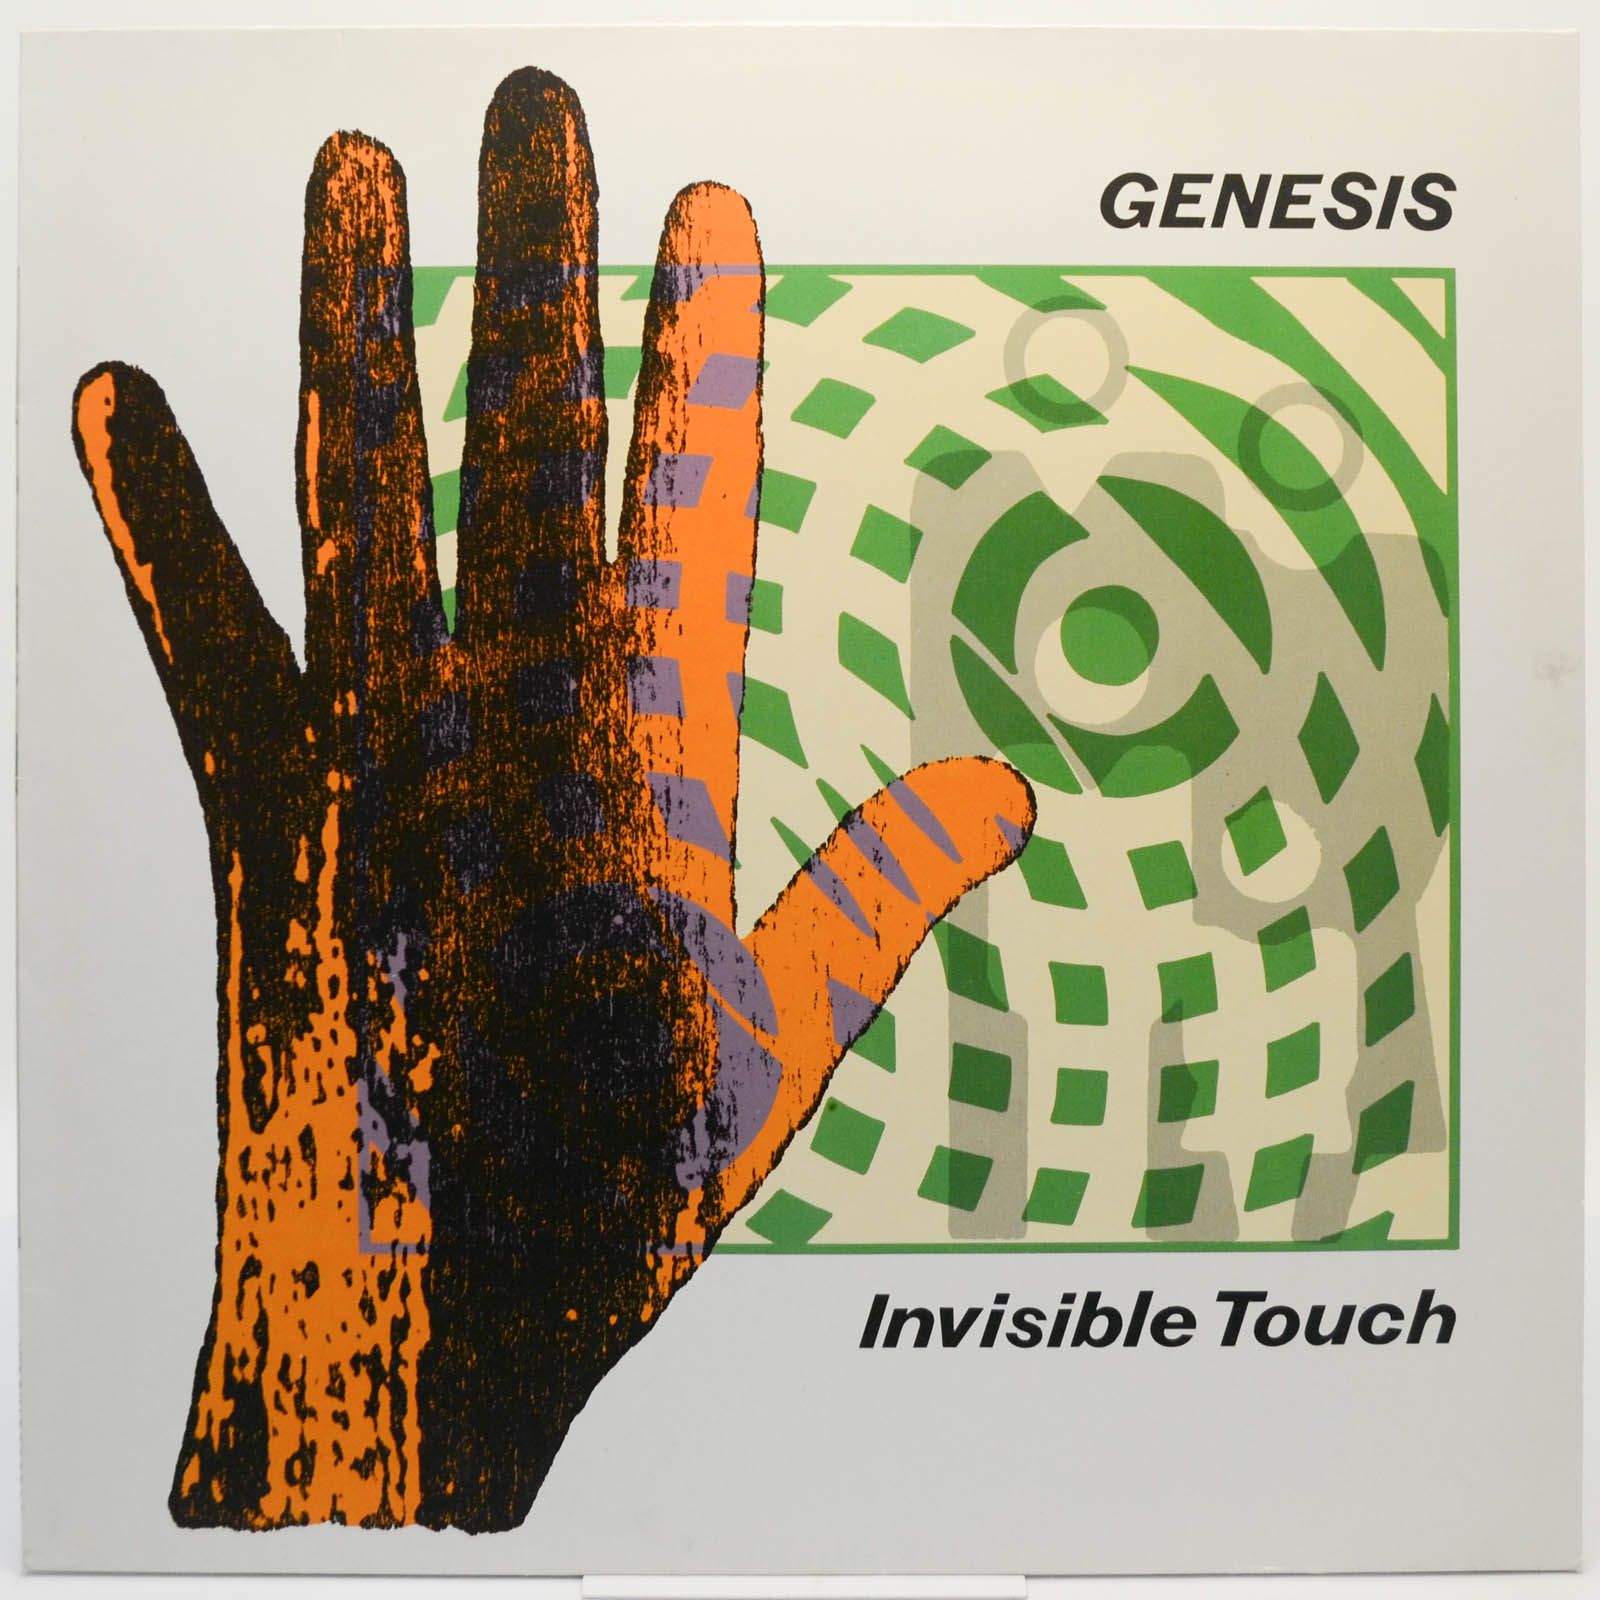 Genesis — Invisible Touch, 1986